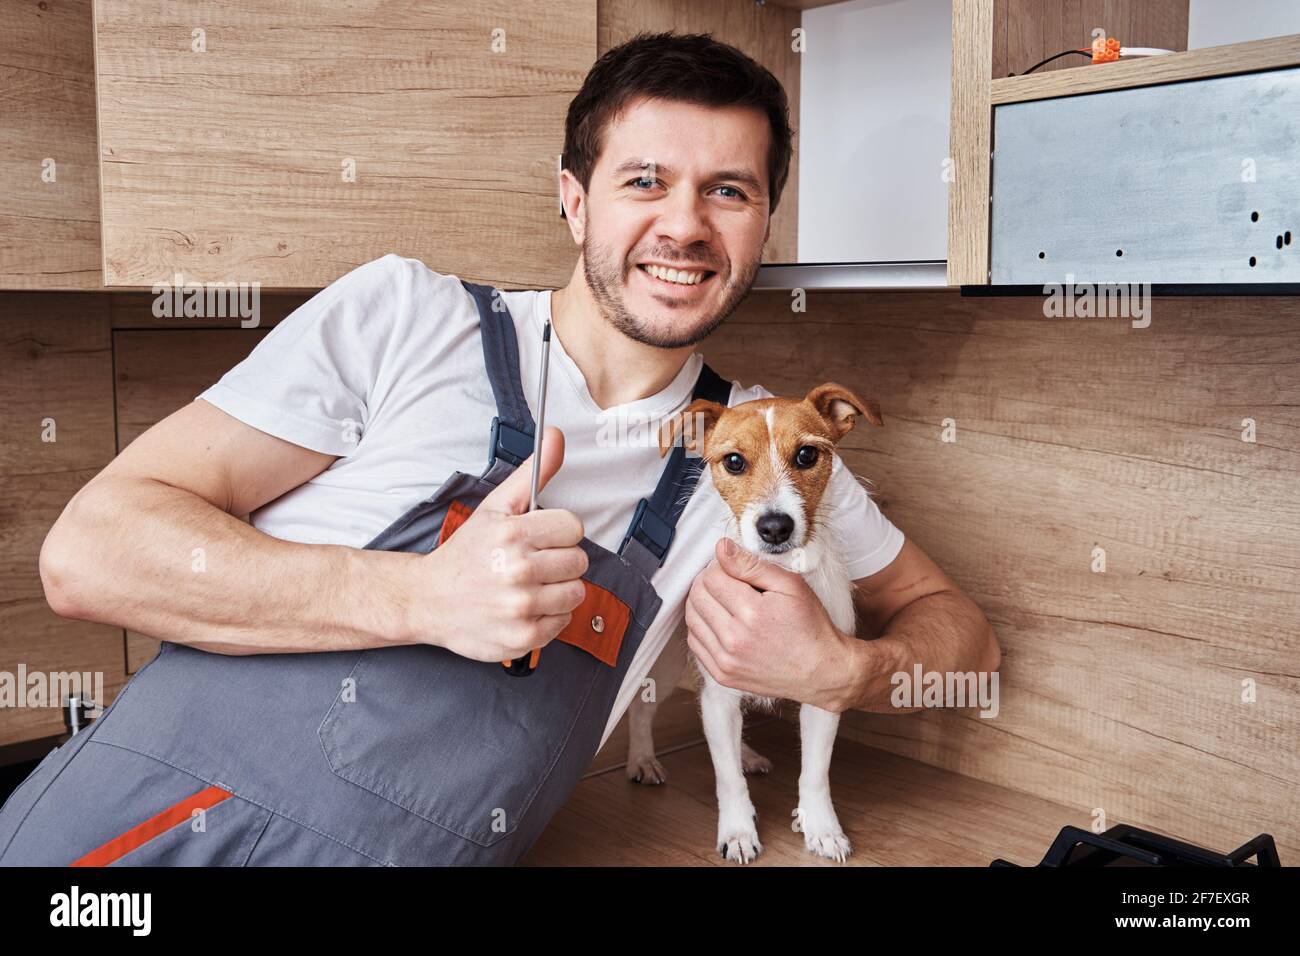 Dog Thumbs Up High Resolution Stock Photography And Images Alamy